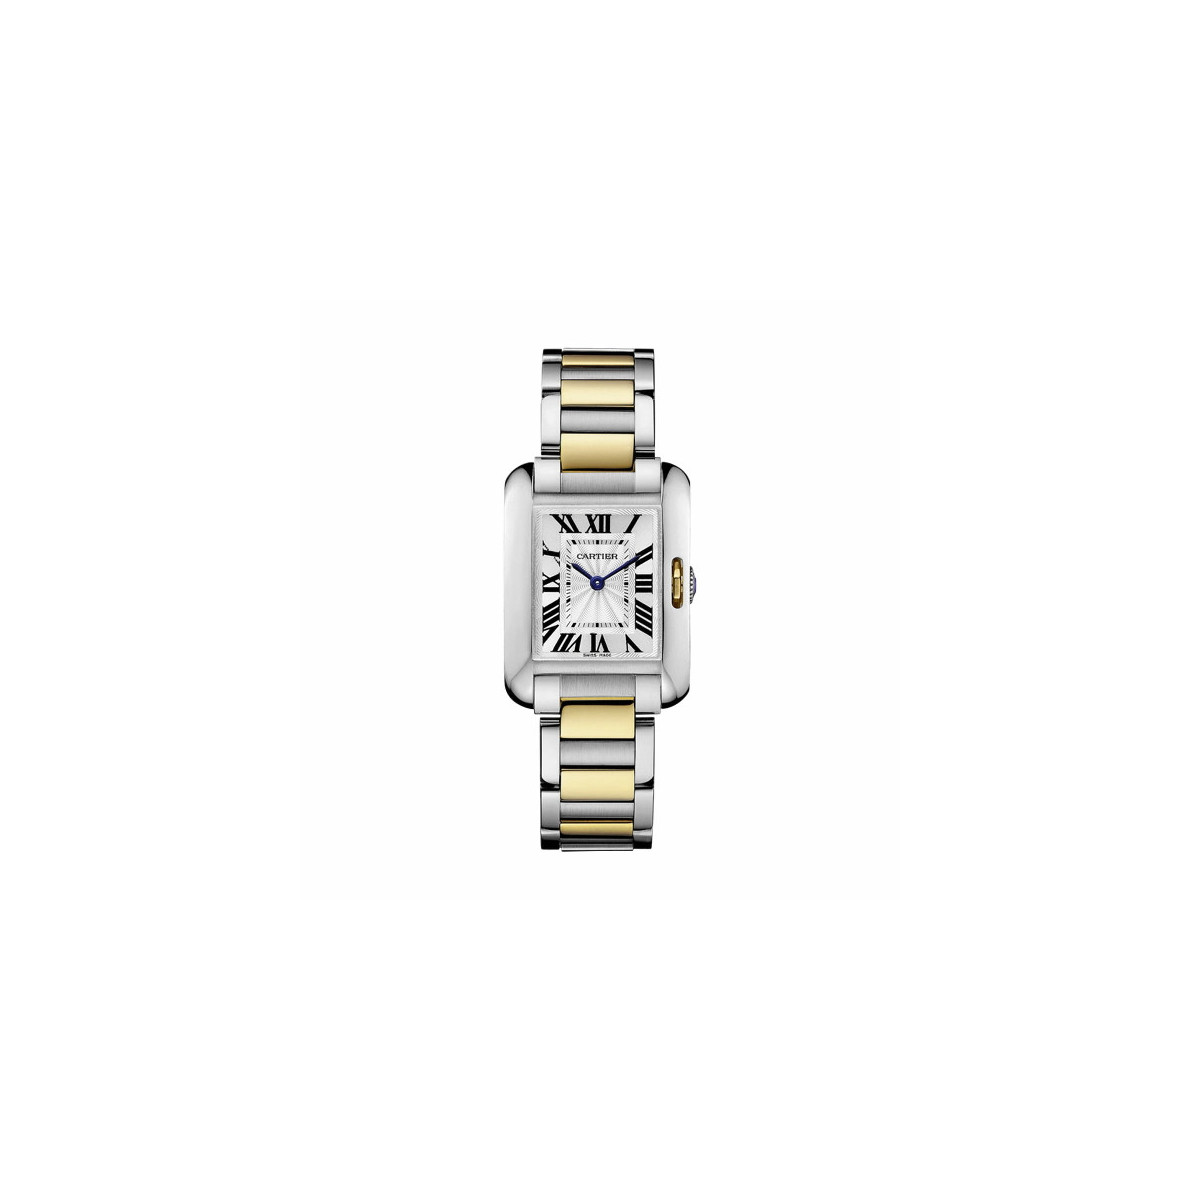 TANK ANGLAISE WATCH W5310046, SMALL MODEL, STEEL, YELLOW GOLD